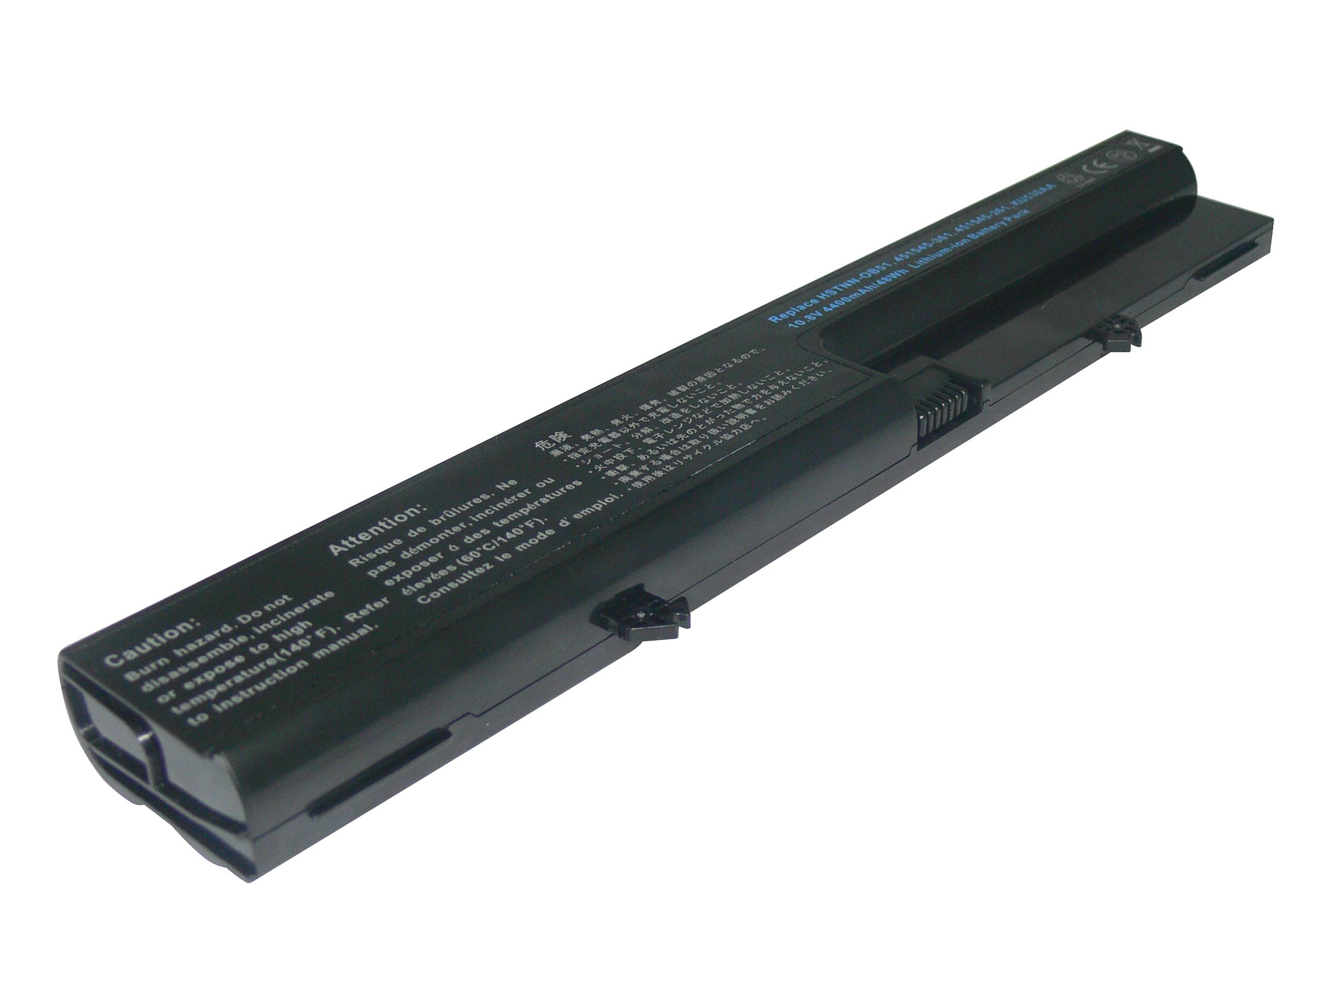 Replacement for HP COMPAQ Business Notebook 6520S, Business Notebook 6530s, Business Notebook 6531s, Business Notebook 6535S, Business Notebook 6720s, Business Notebook 6720s/CT, Business Notebook 6820s Laptop Battery